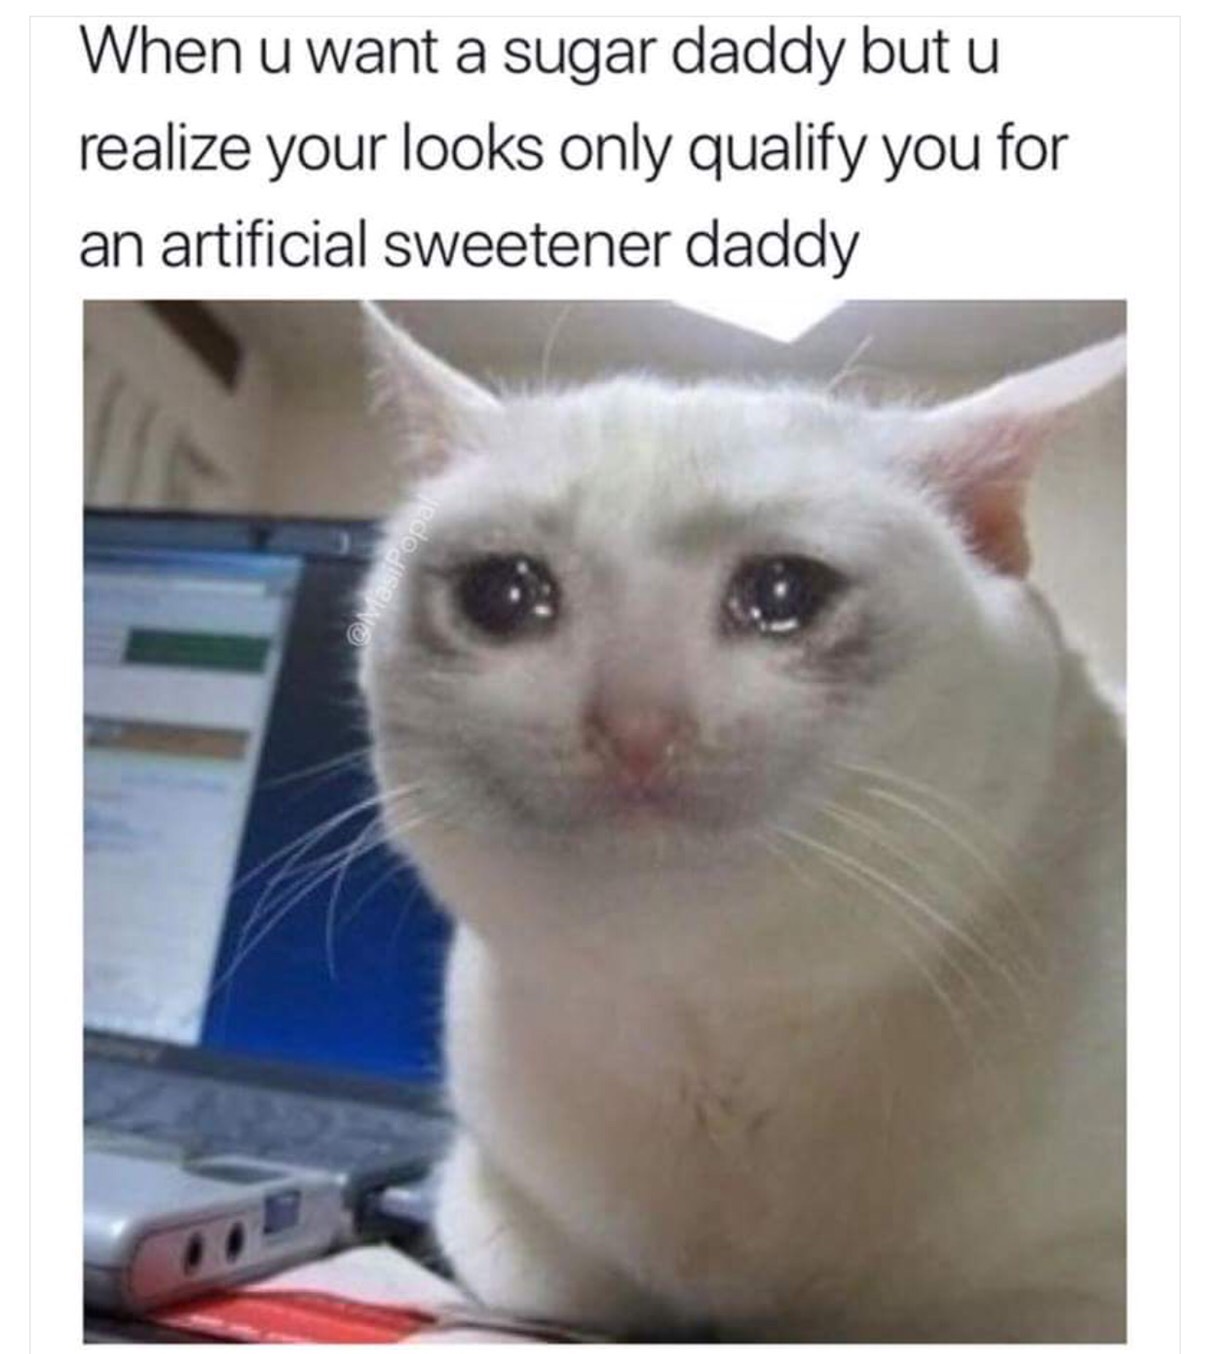 artificial sweetener daddy - When u want a sugar daddy but u realize your looks only qualify you for an artificial sweetener daddy